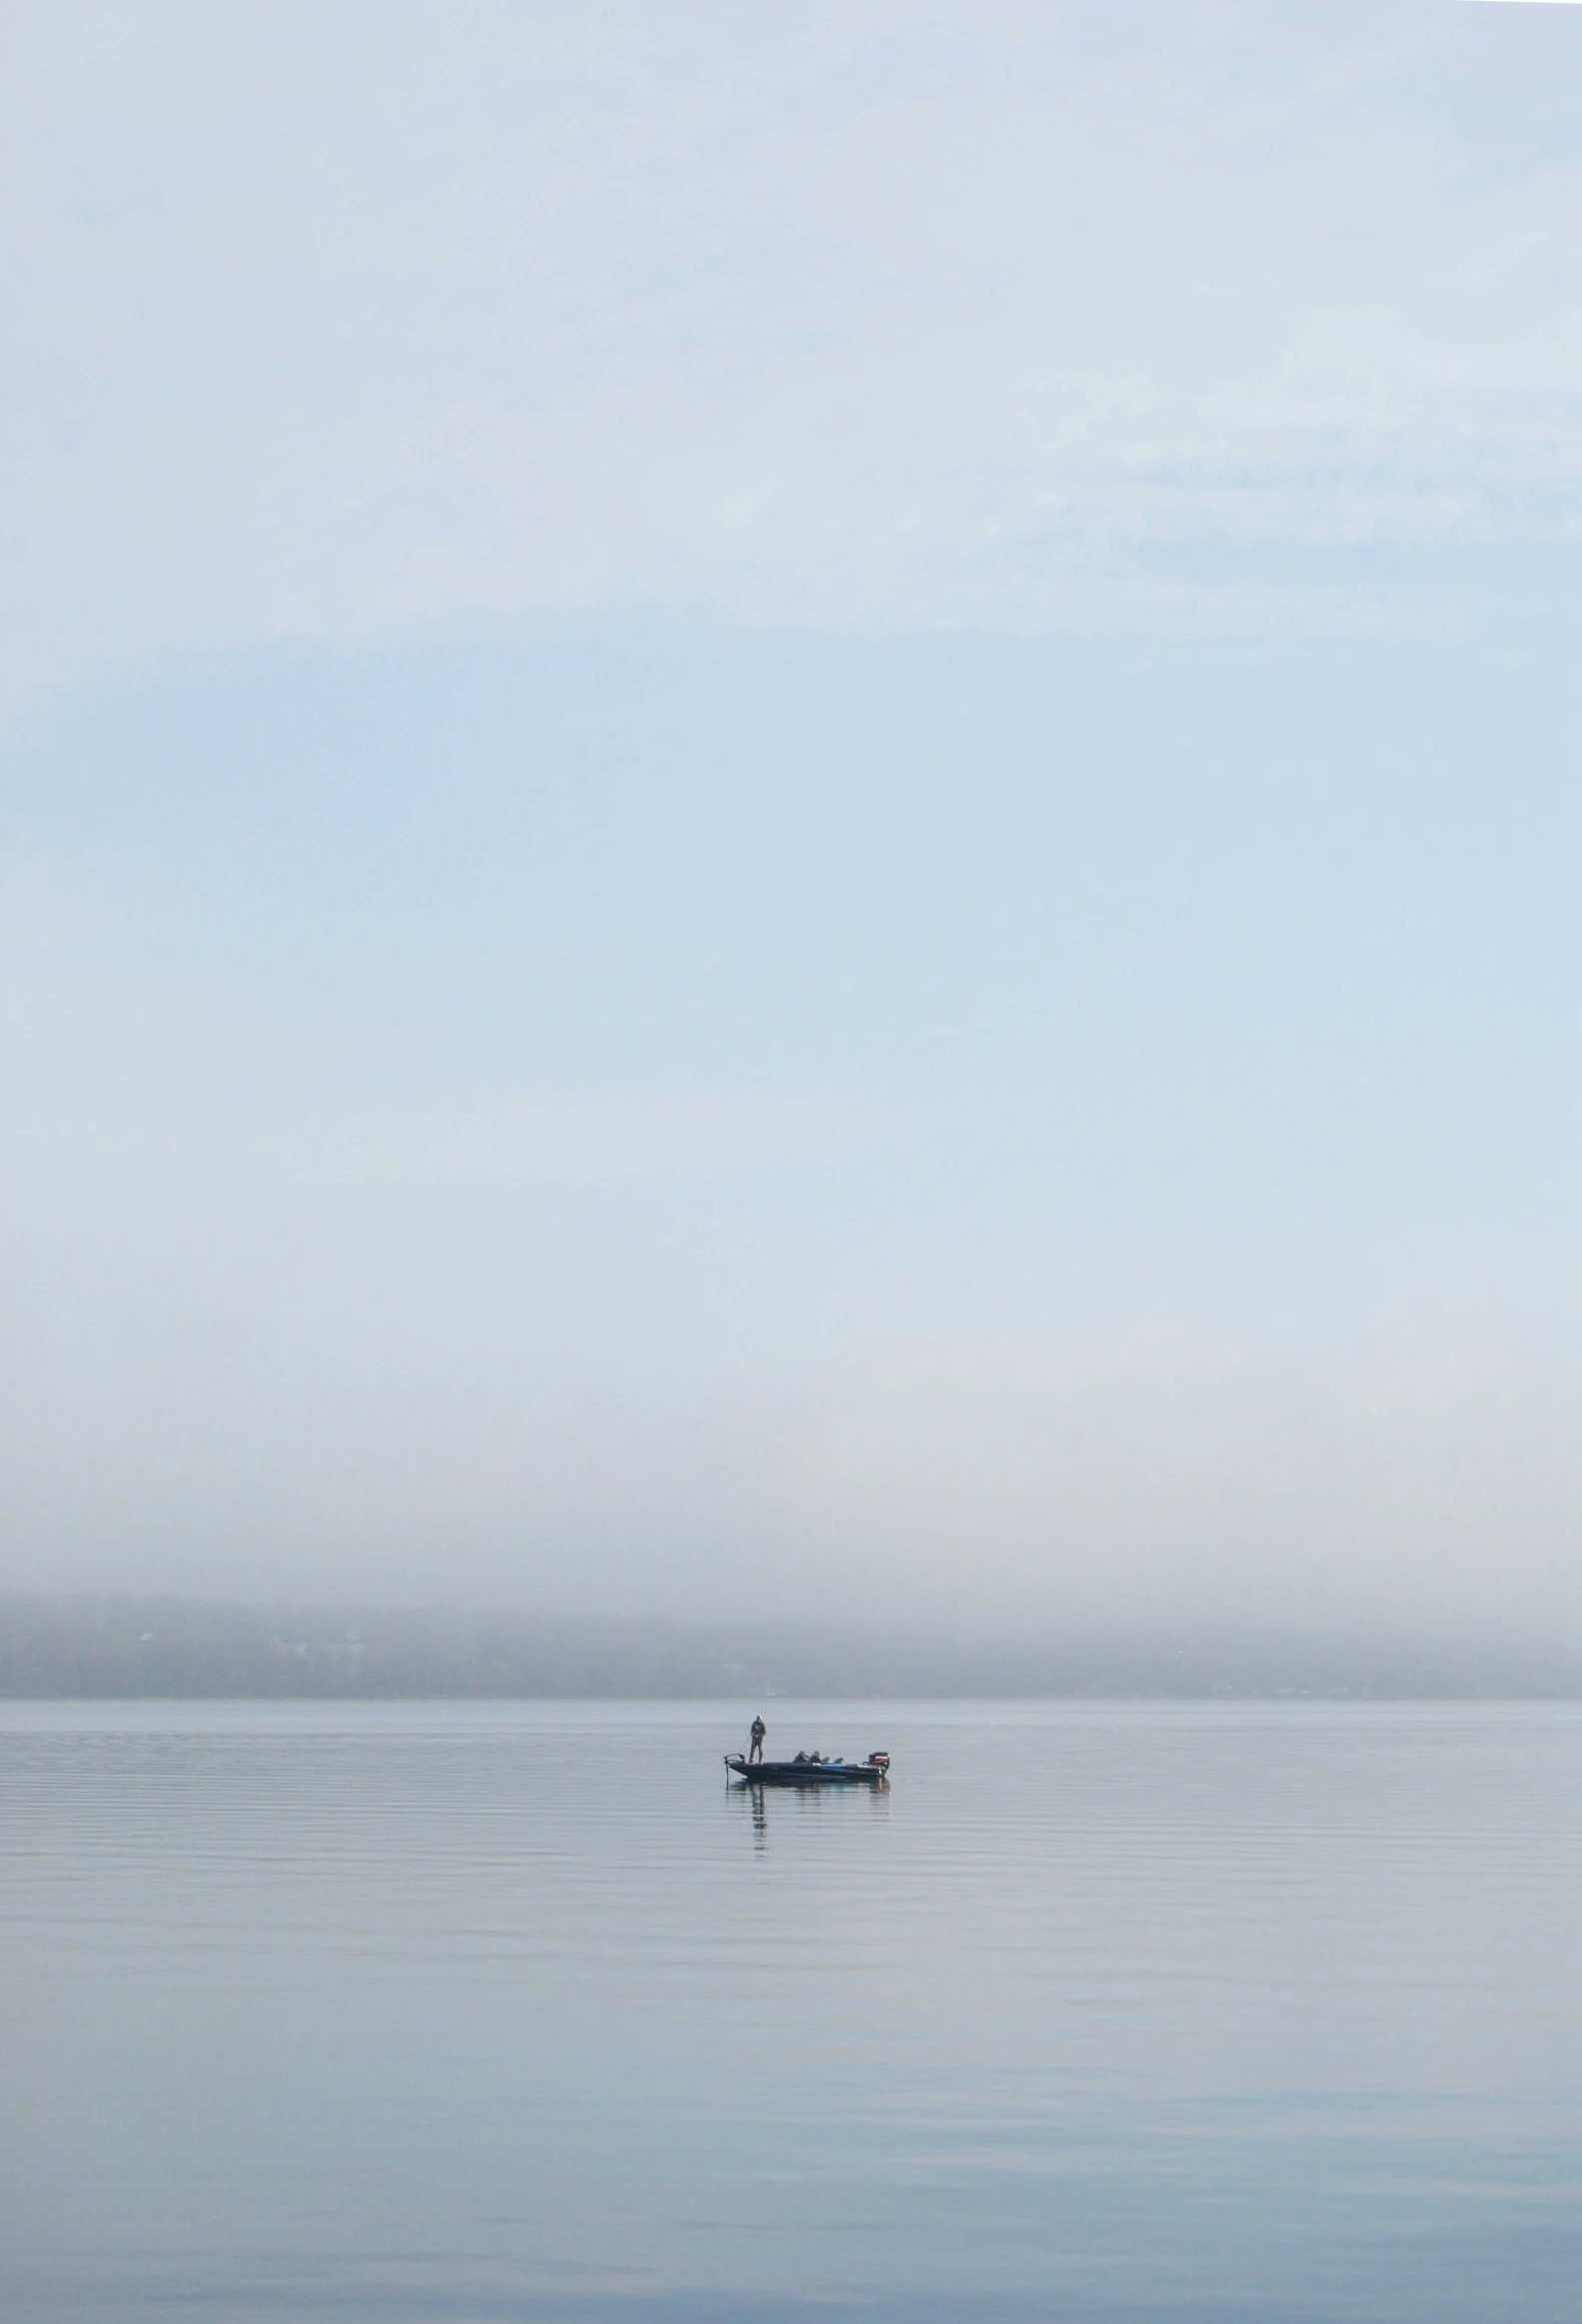 a person in a small boat floating in a large body of water